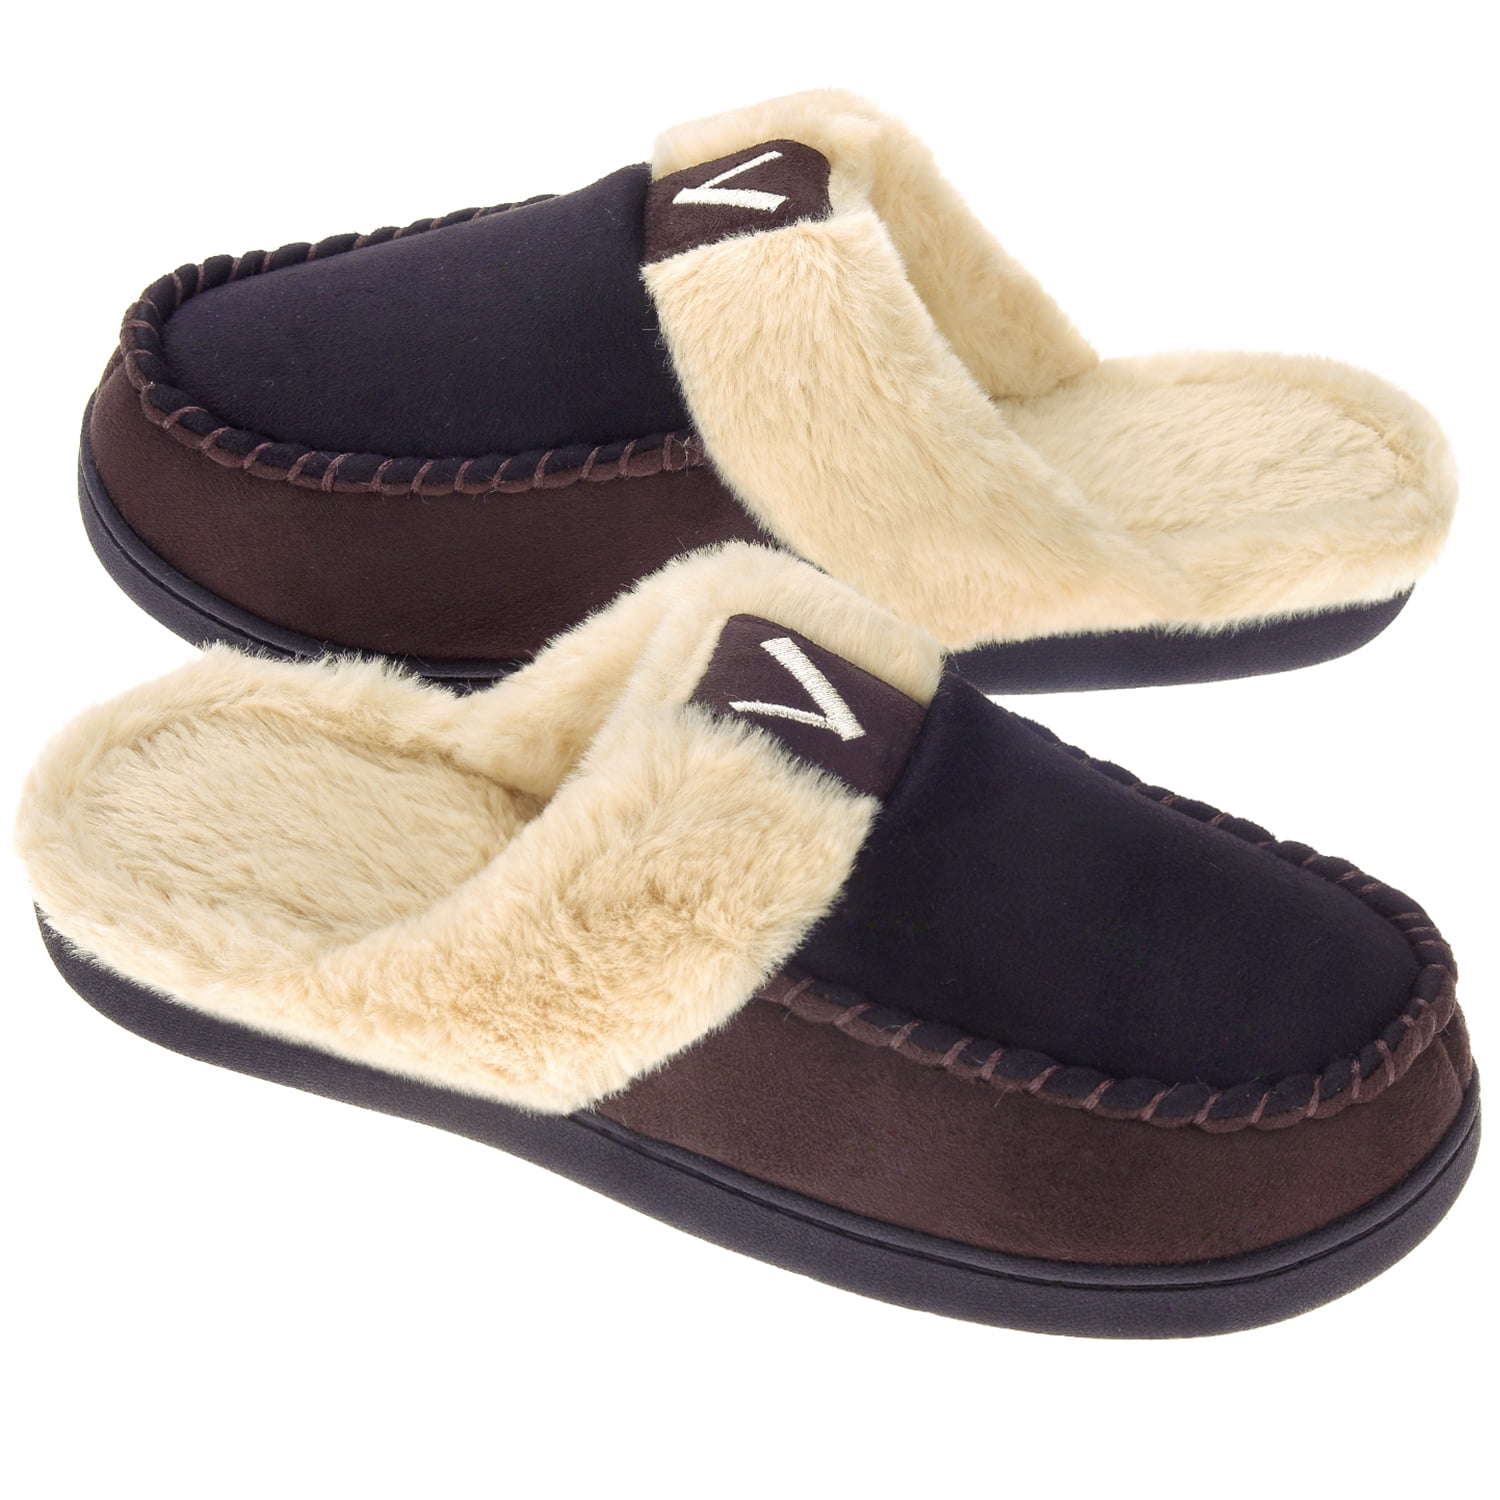 VLLy Slippers for Men Moccasins Slip-on Indoor Outdoor Mens Slippers House Shoes with Memory Foam 